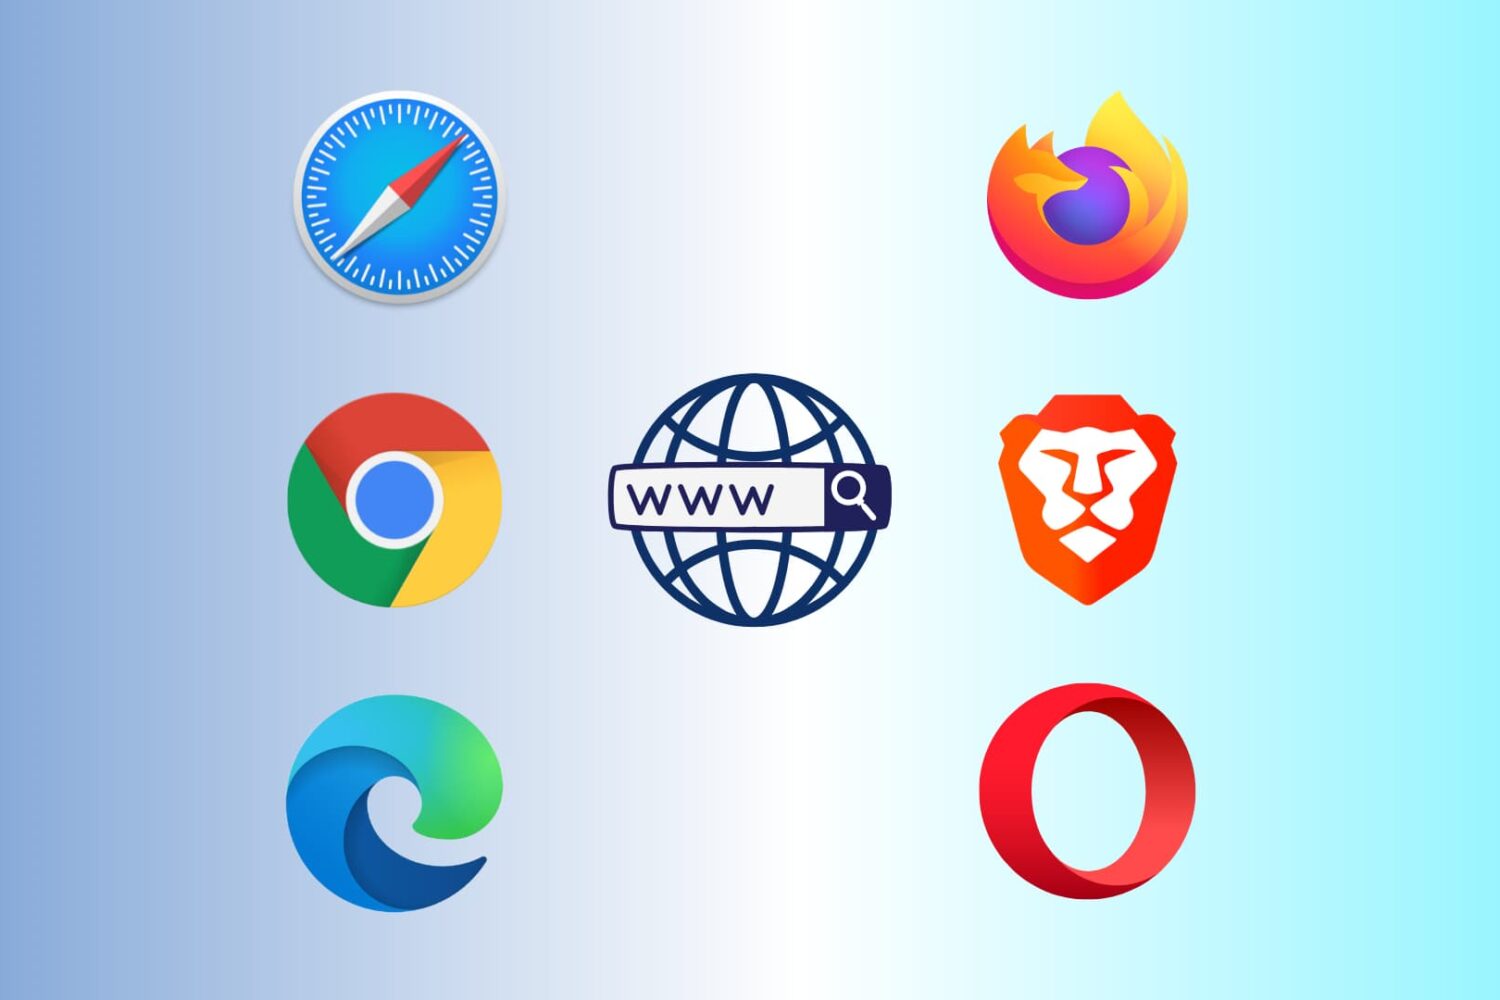 Safari, Chrome, Edge, Firefox, Brave, and Opera browser icons on a light blue background